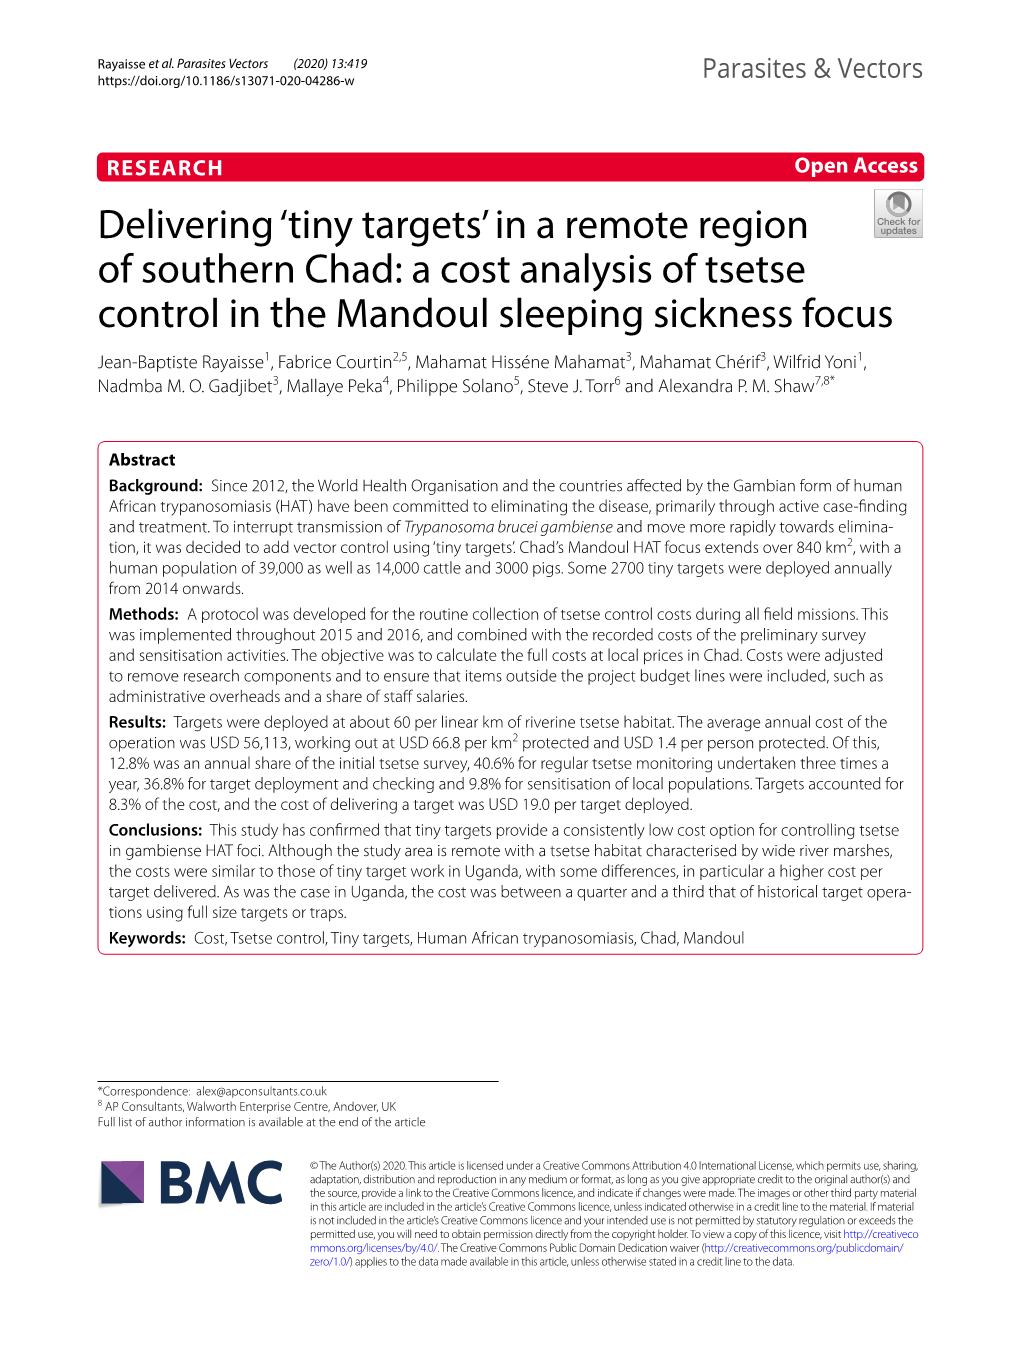 'Tiny Targets' in a Remote Region of Southern Chad: a Cost Analysis of Tsetse Control in the Mandoul Sleeping